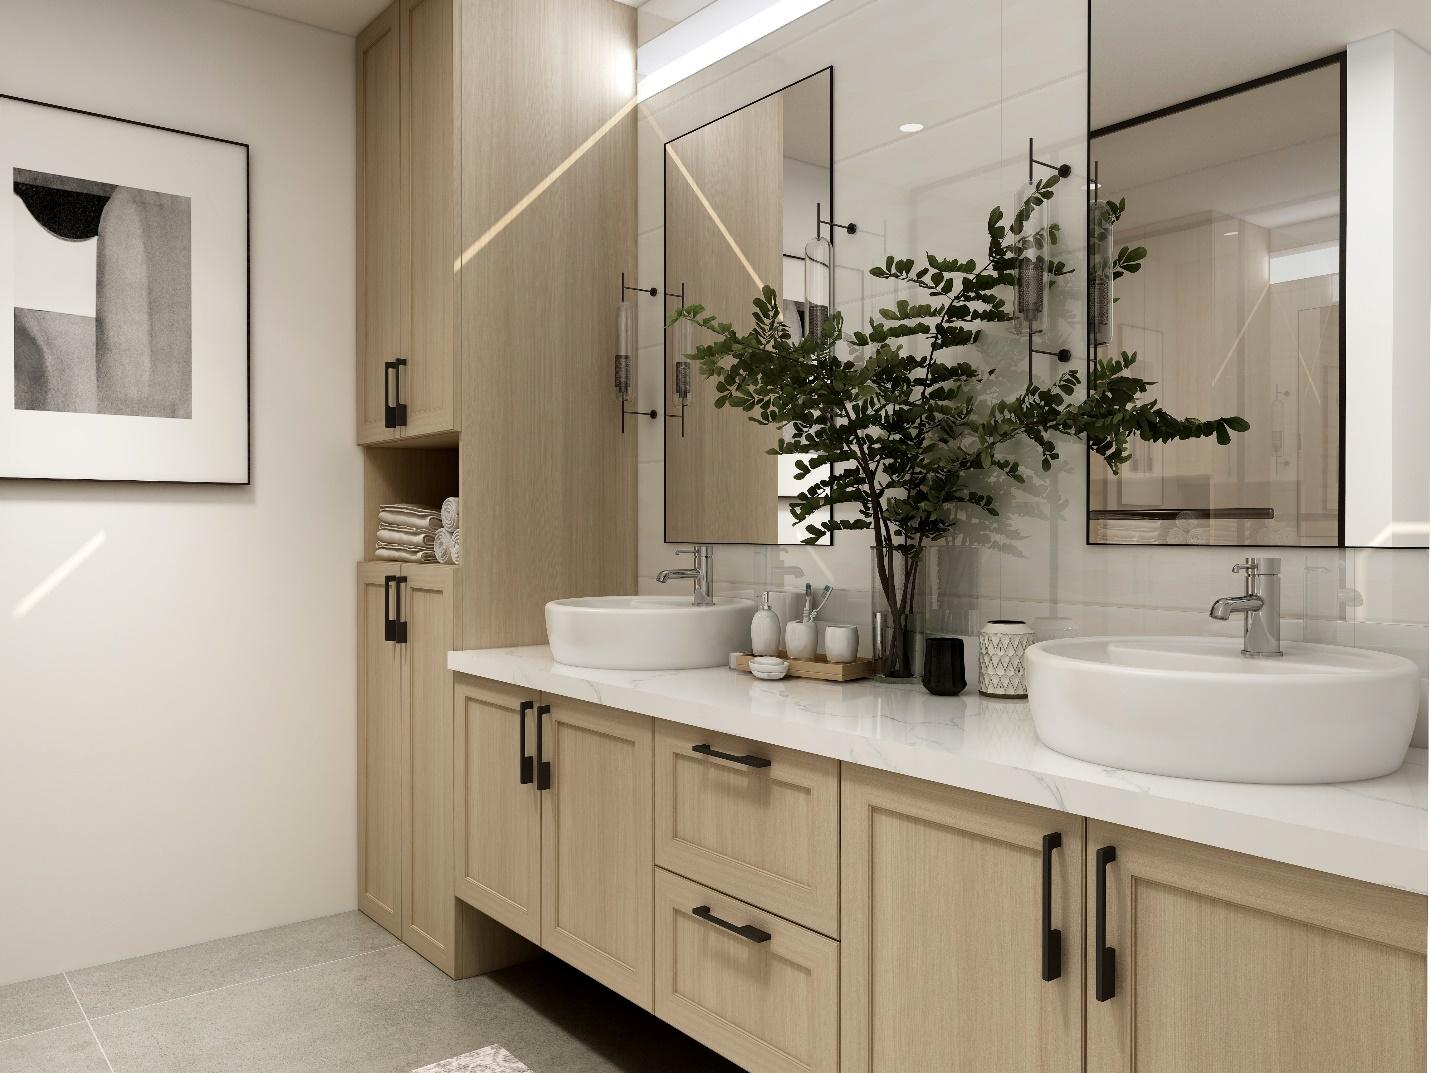 a modern bathroom with shelves and cabinets